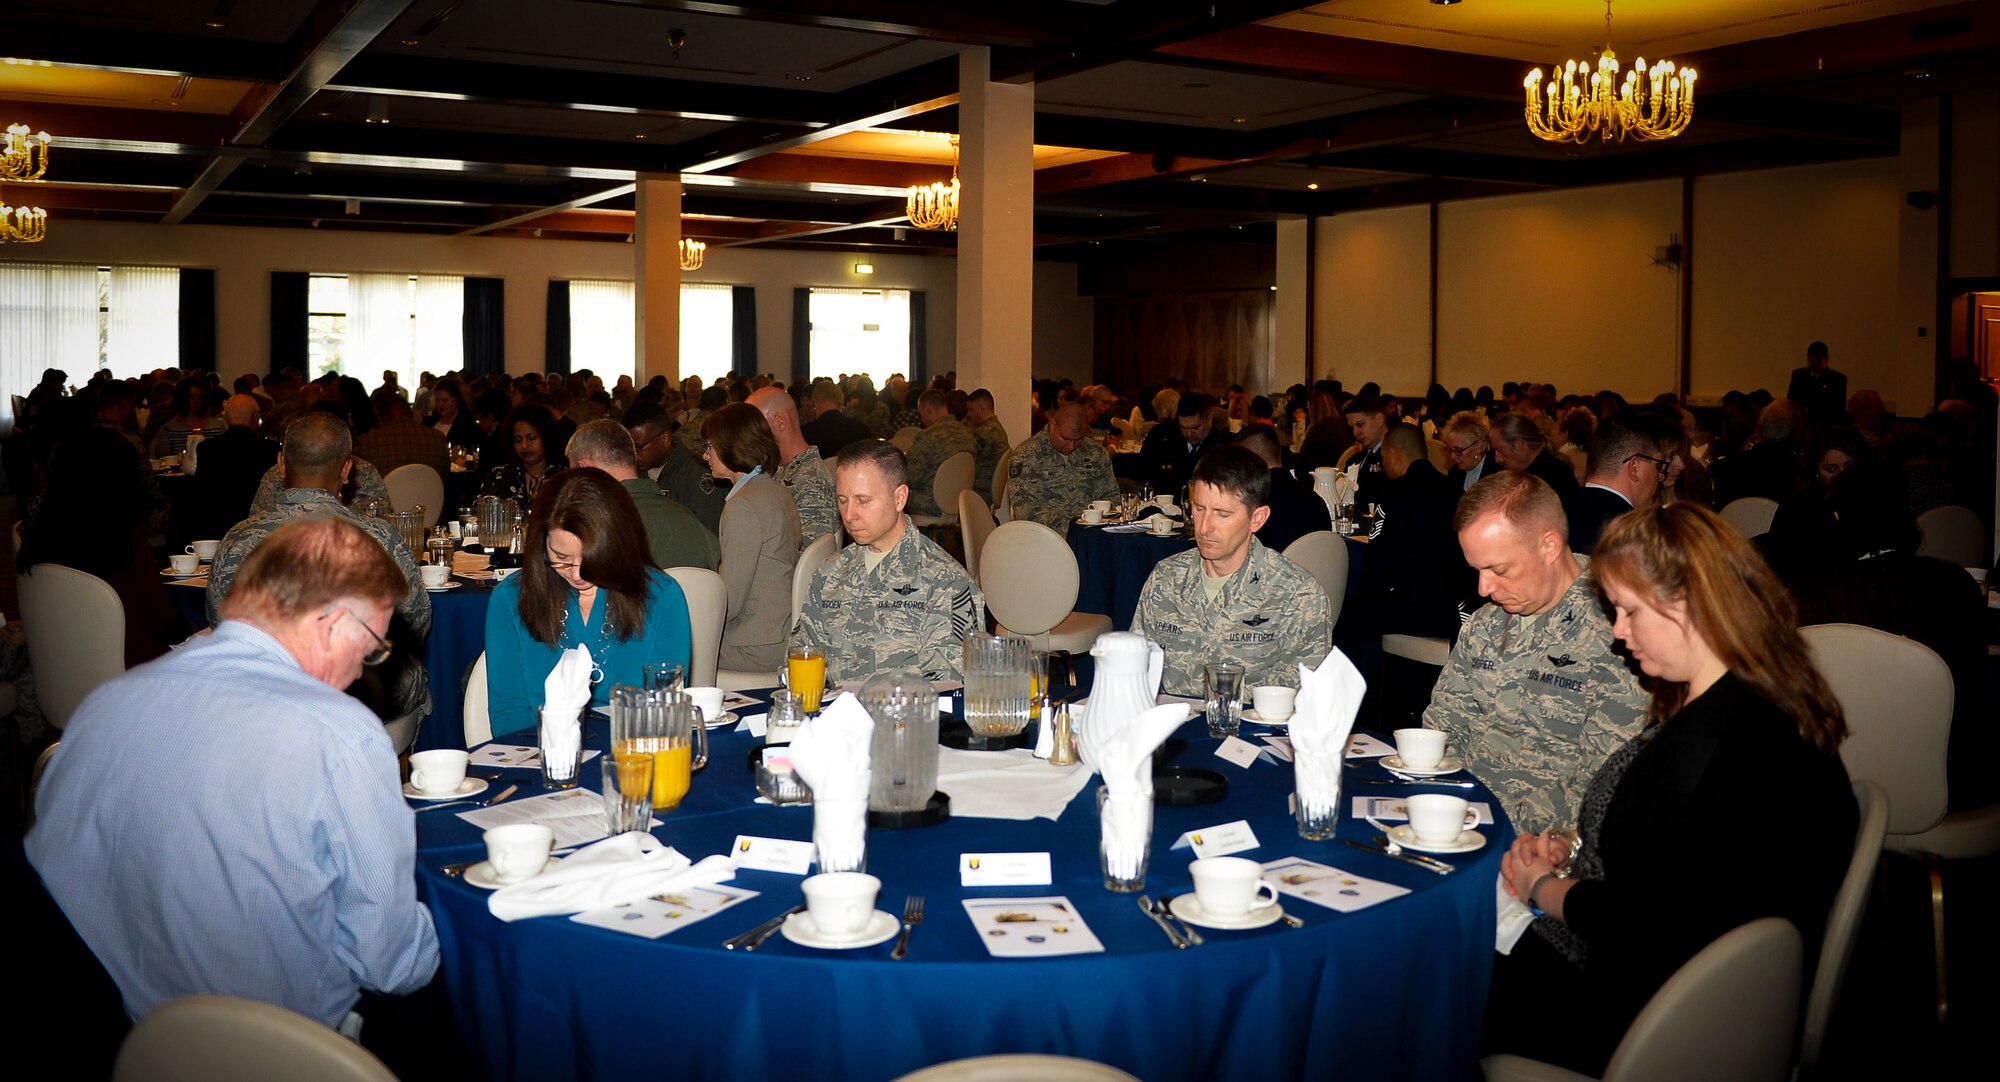 Military and civilian members of the Department of Defense bow their heads in prayer during a National Prayer Breakfast on Ramstein Air Base, Germany, March 13, 2017. The annual event is open to people of all religious backgrounds, and even to people of no religion. The 86th Airlift Wing Chaplain Corps hosted the prayer breakfast. (U.S. Air Force photo by Airman 1st Class Joshua Magbanua)